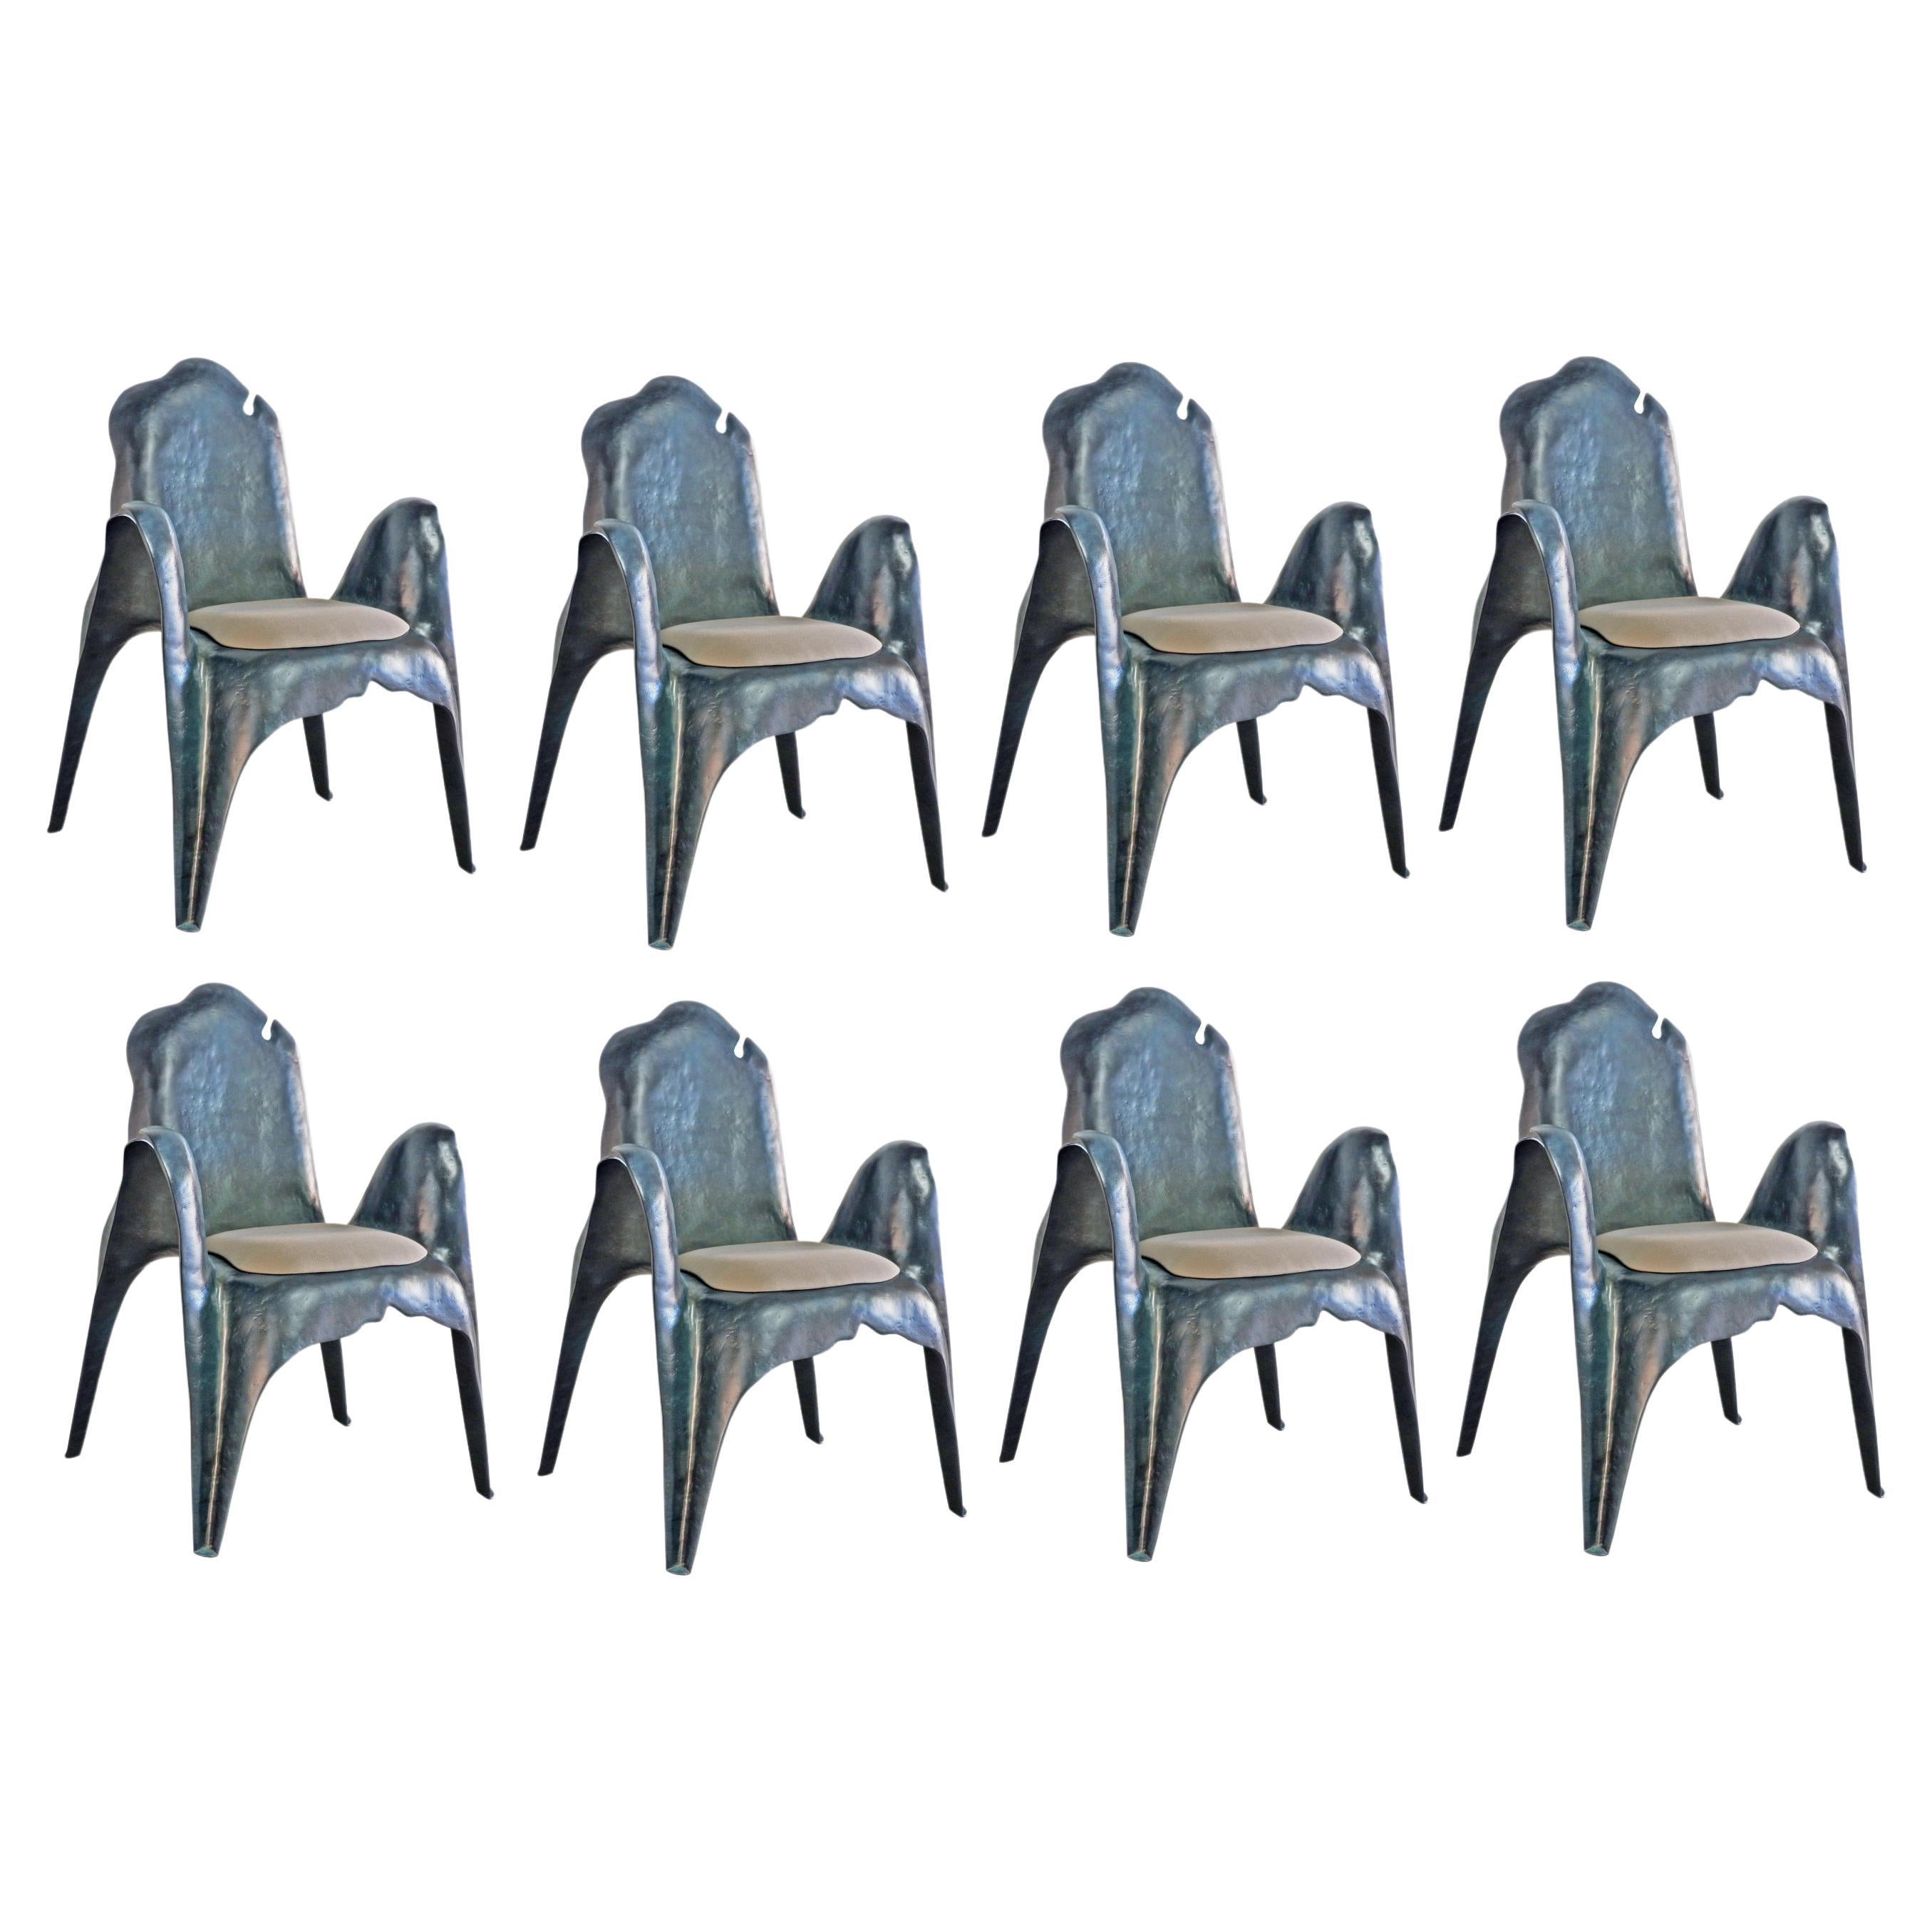 Set of 8 Organic Shaped Dining Chairs in Metallic or Natural Finish For Sale